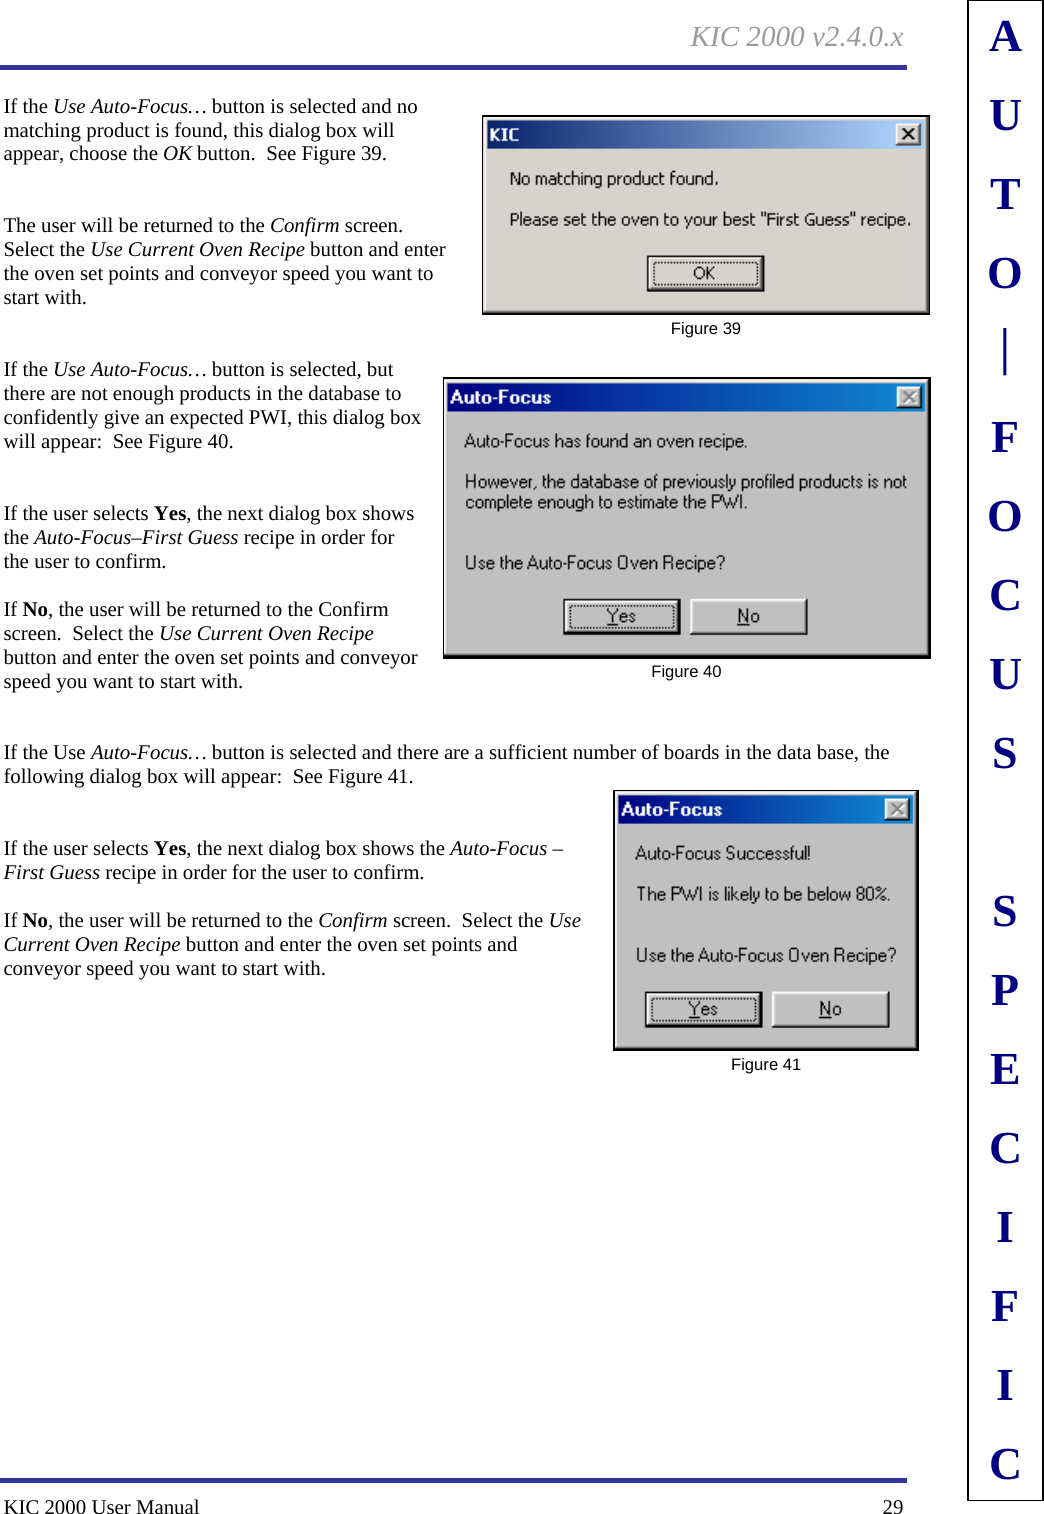 KIC 2000 v2.4.0.x KIC 2000 User Manual    29 If the Use Auto-Focus… button is selected and no matching product is found, this dialog box will appear, choose the OK button.  See Figure 39.     The user will be returned to the Confirm screen.  Select the Use Current Oven Recipe button and enter the oven set points and conveyor speed you want to start with.   If the Use Auto-Focus… button is selected, but there are not enough products in the database to confidently give an expected PWI, this dialog box will appear:  See Figure 40.     If the user selects Yes, the next dialog box shows the Auto-Focus–First Guess recipe in order for the user to confirm.  If No, the user will be returned to the Confirm screen.  Select the Use Current Oven Recipe button and enter the oven set points and conveyor speed you want to start with.   If the Use Auto-Focus… button is selected and there are a sufficient number of boards in the data base, the following dialog box will appear:  See Figure 41.     If the user selects Yes, the next dialog box shows the Auto-Focus –First Guess recipe in order for the user to confirm.  If No, the user will be returned to the Confirm screen.  Select the Use Current Oven Recipe button and enter the oven set points and conveyor speed you want to start with.     Figure 39  Figure 40  Figure 41 AUTO⎪FOCUS SPECIFIC